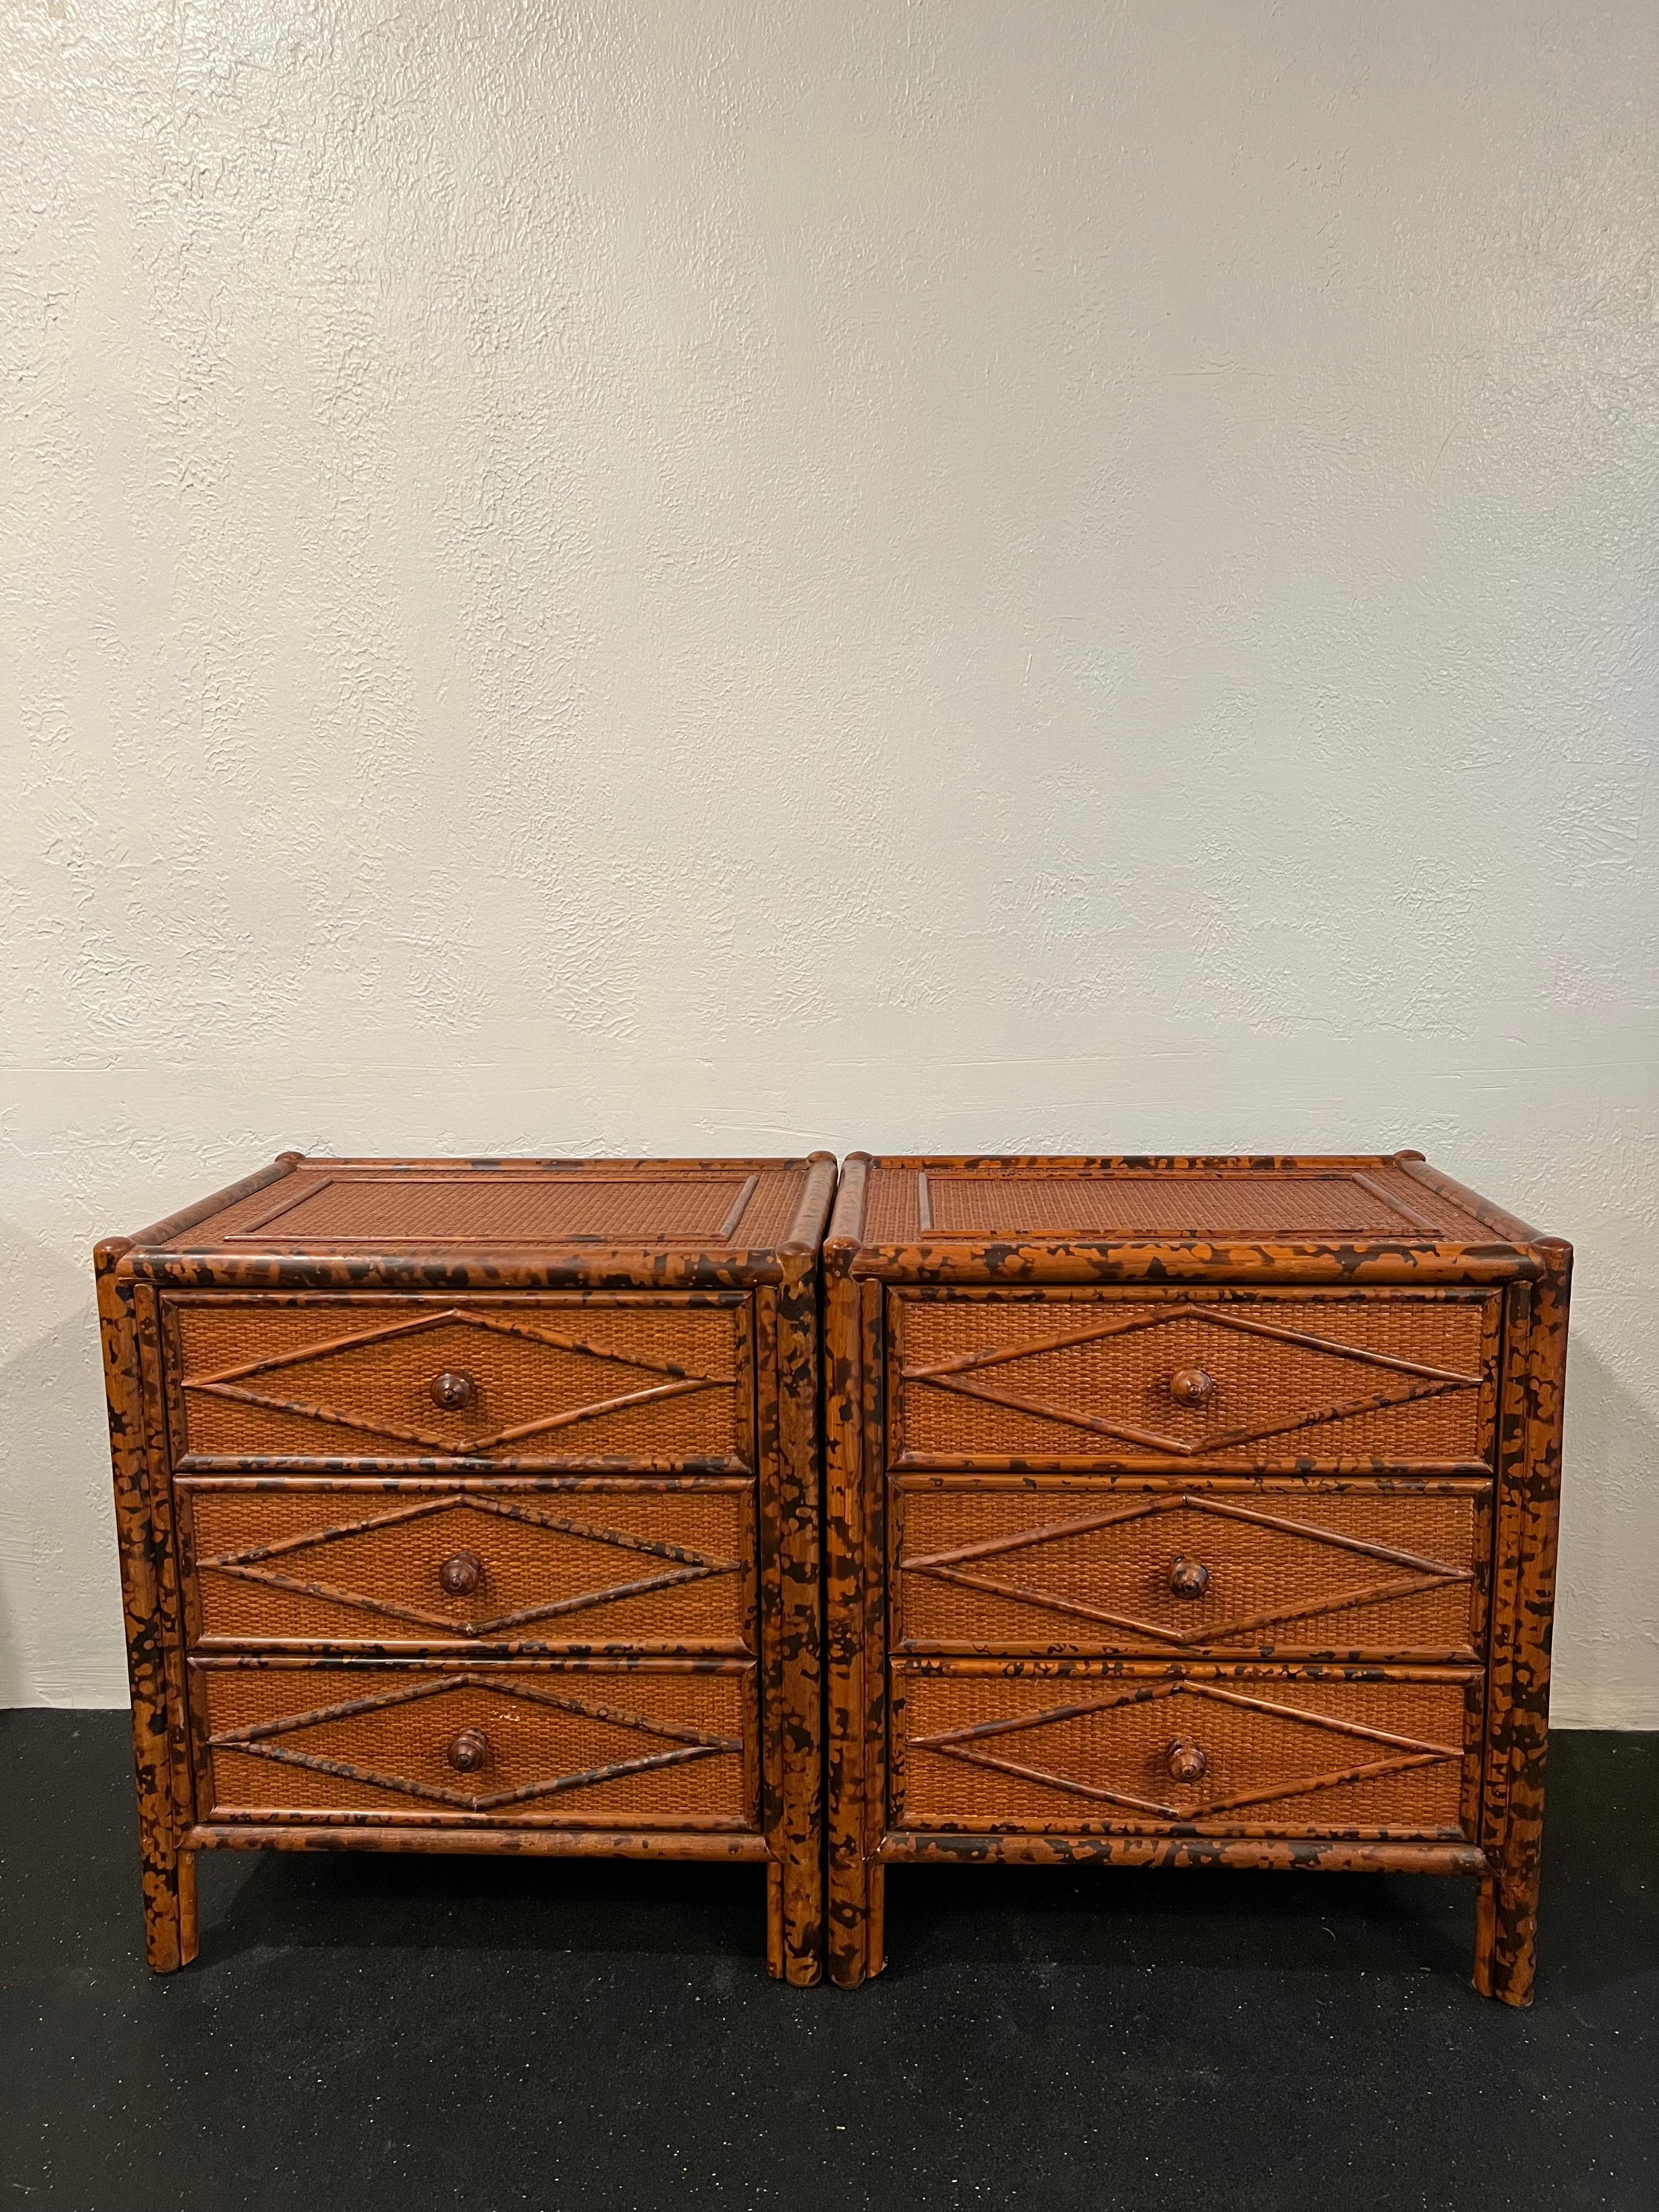 British colonial style burnt bamboo and cane pair of nightstands. Slight wear to finish of cane (please refer to photos). Matching chest of drawers and dresser available in separate listings. 

Would work well in a variety of interiors such as